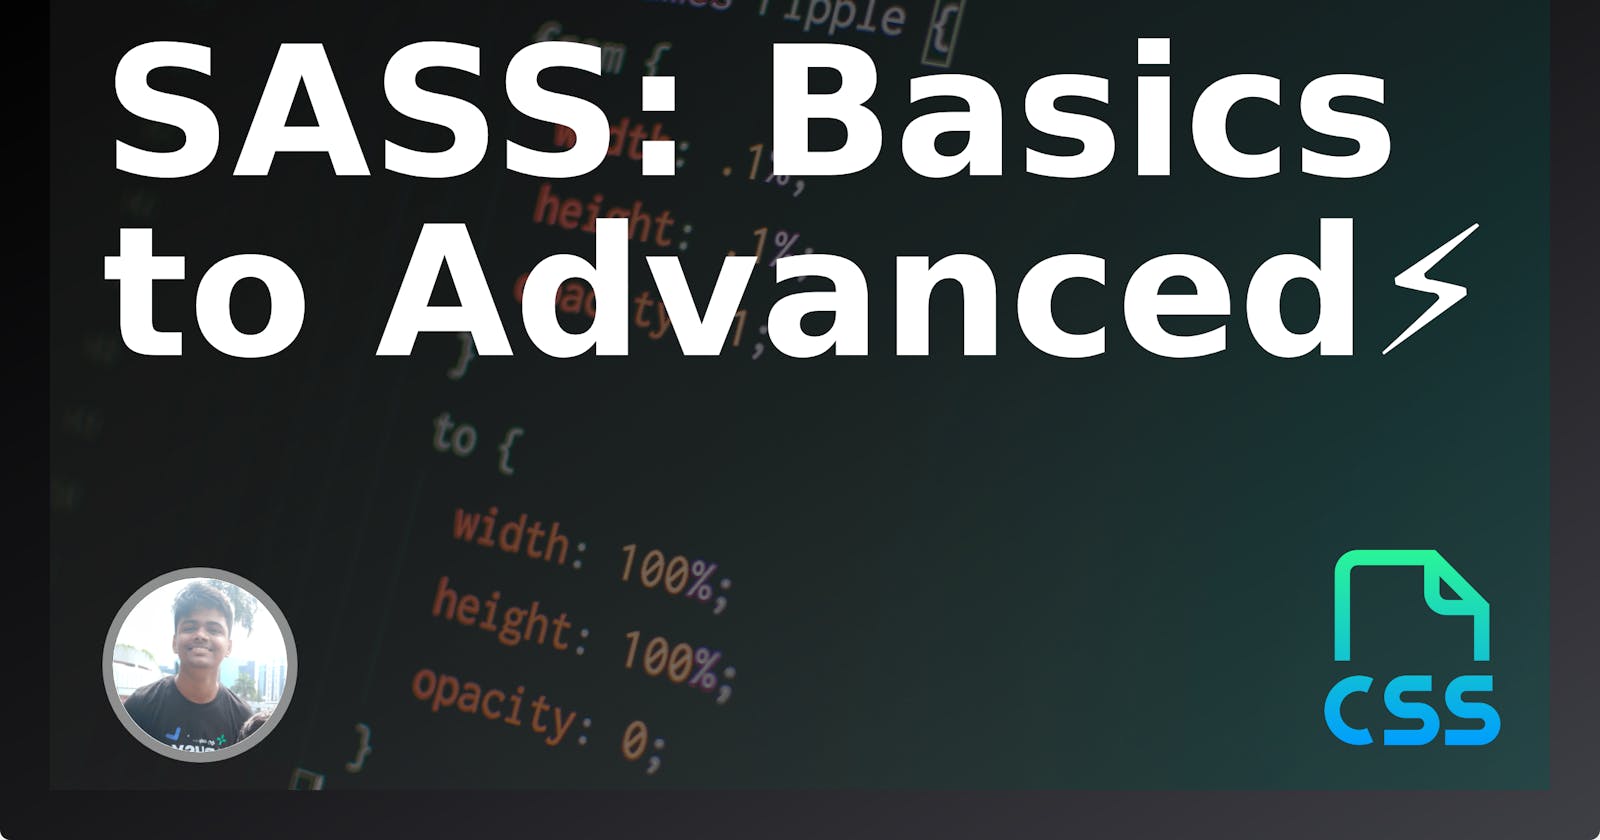 SaSS basics to advanced: Give superpower to your CSS